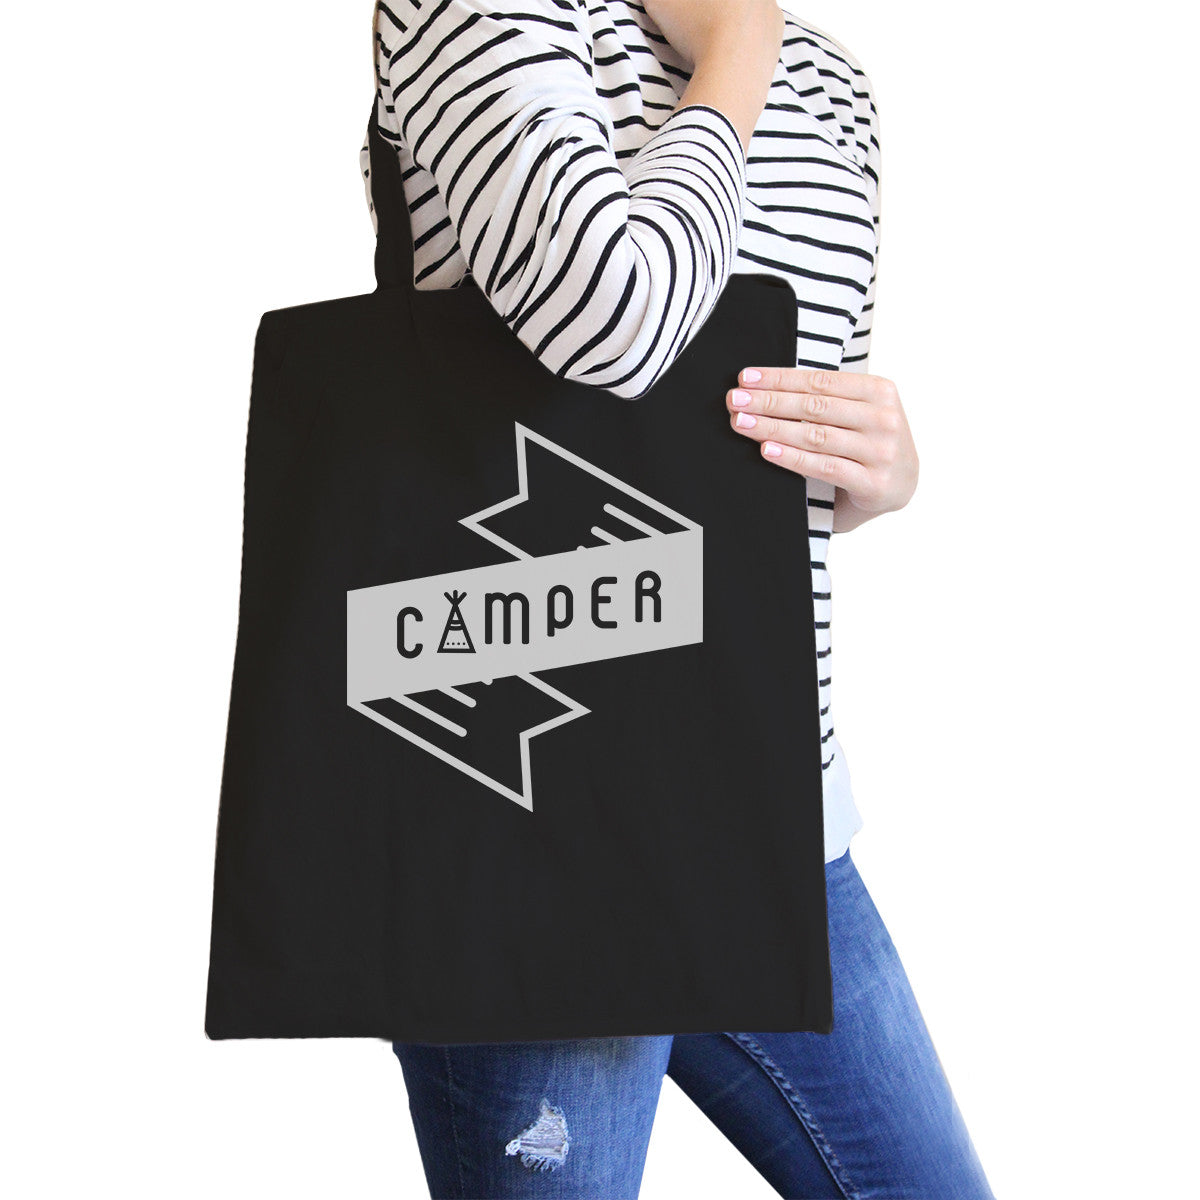 Camper Black Canvas Bag Cute Design Gift Ideas For Camping Lover